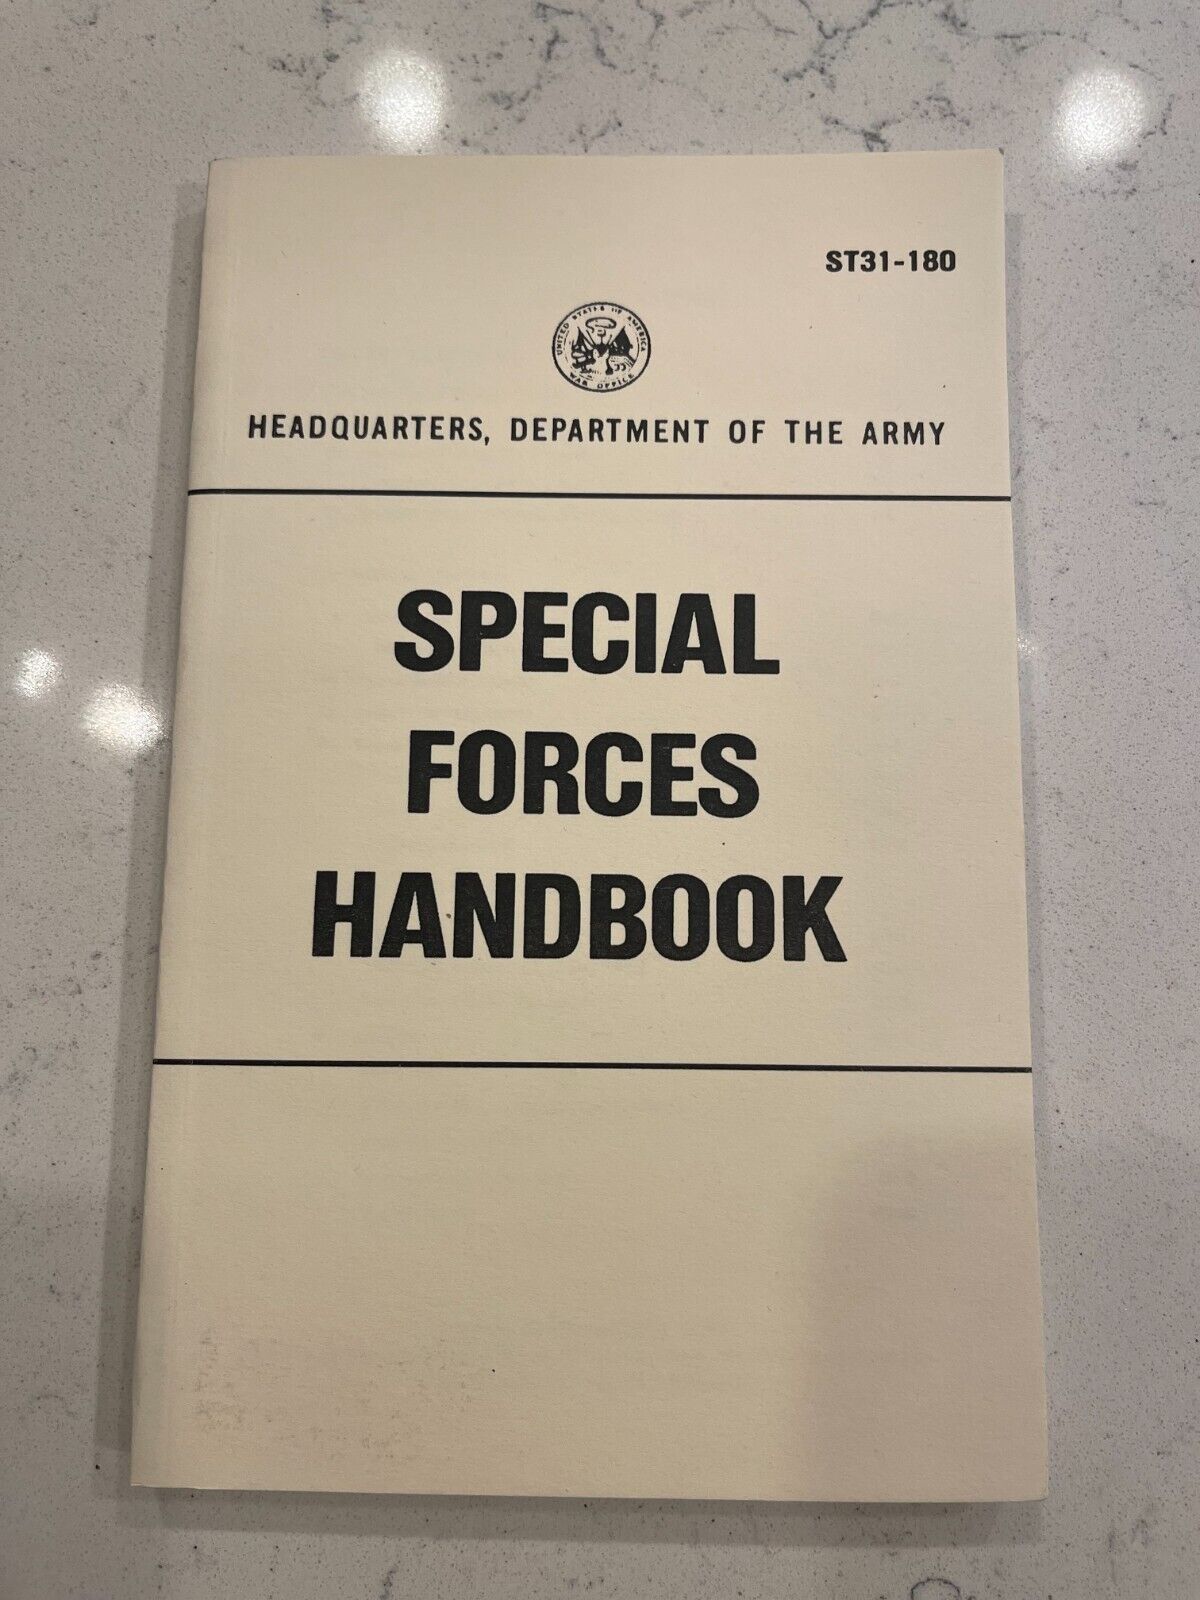 US Special Forces Handbook ST31-180